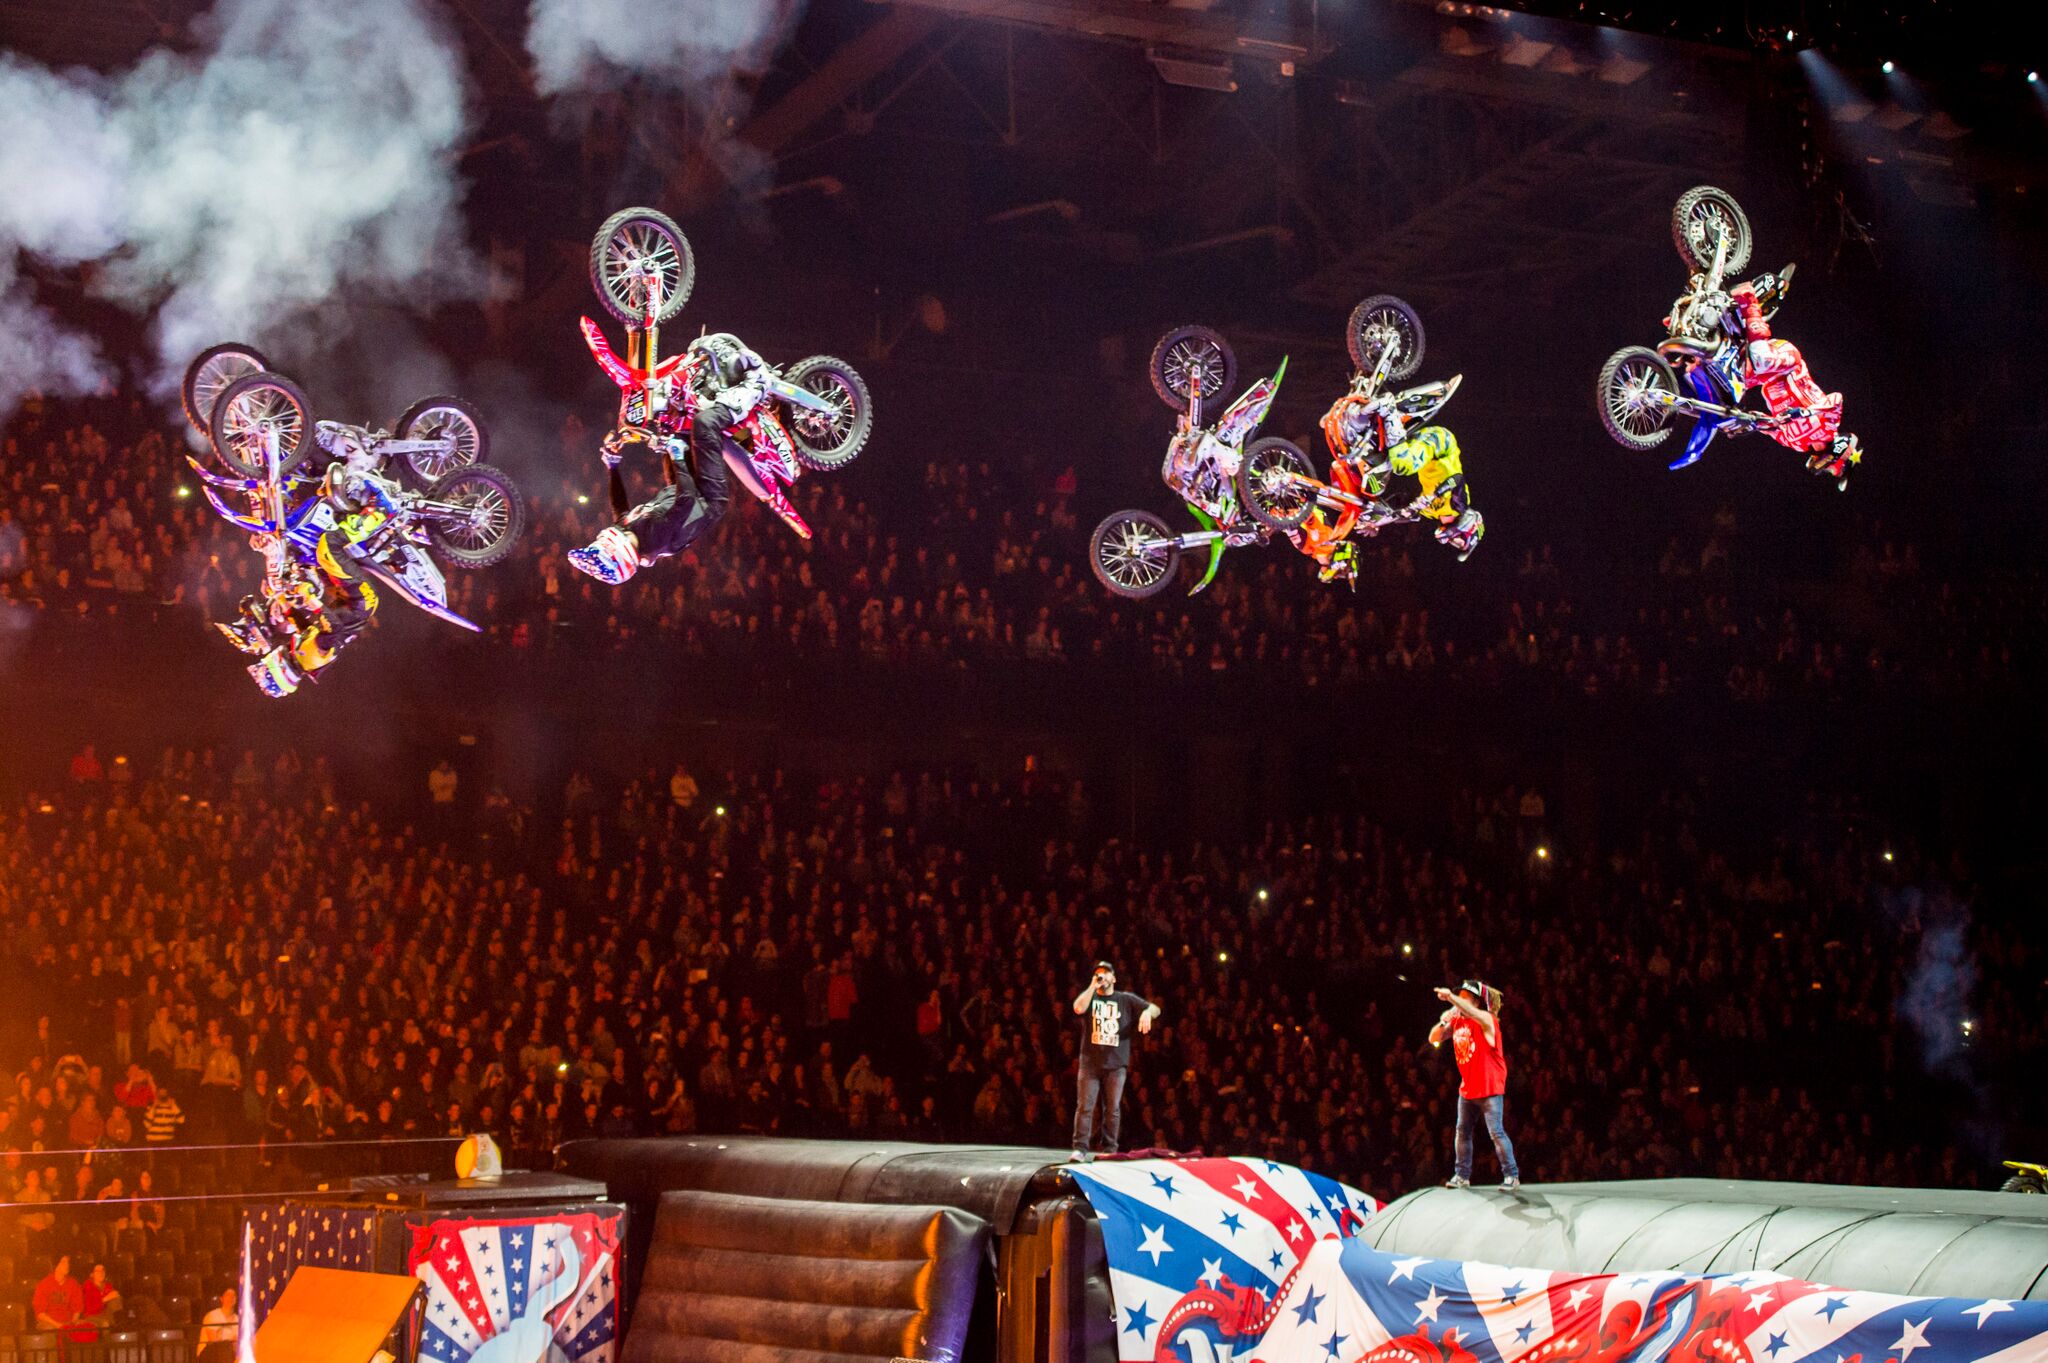 Nitro Circus UK Are you ready for the fuel filled adrenaline rush